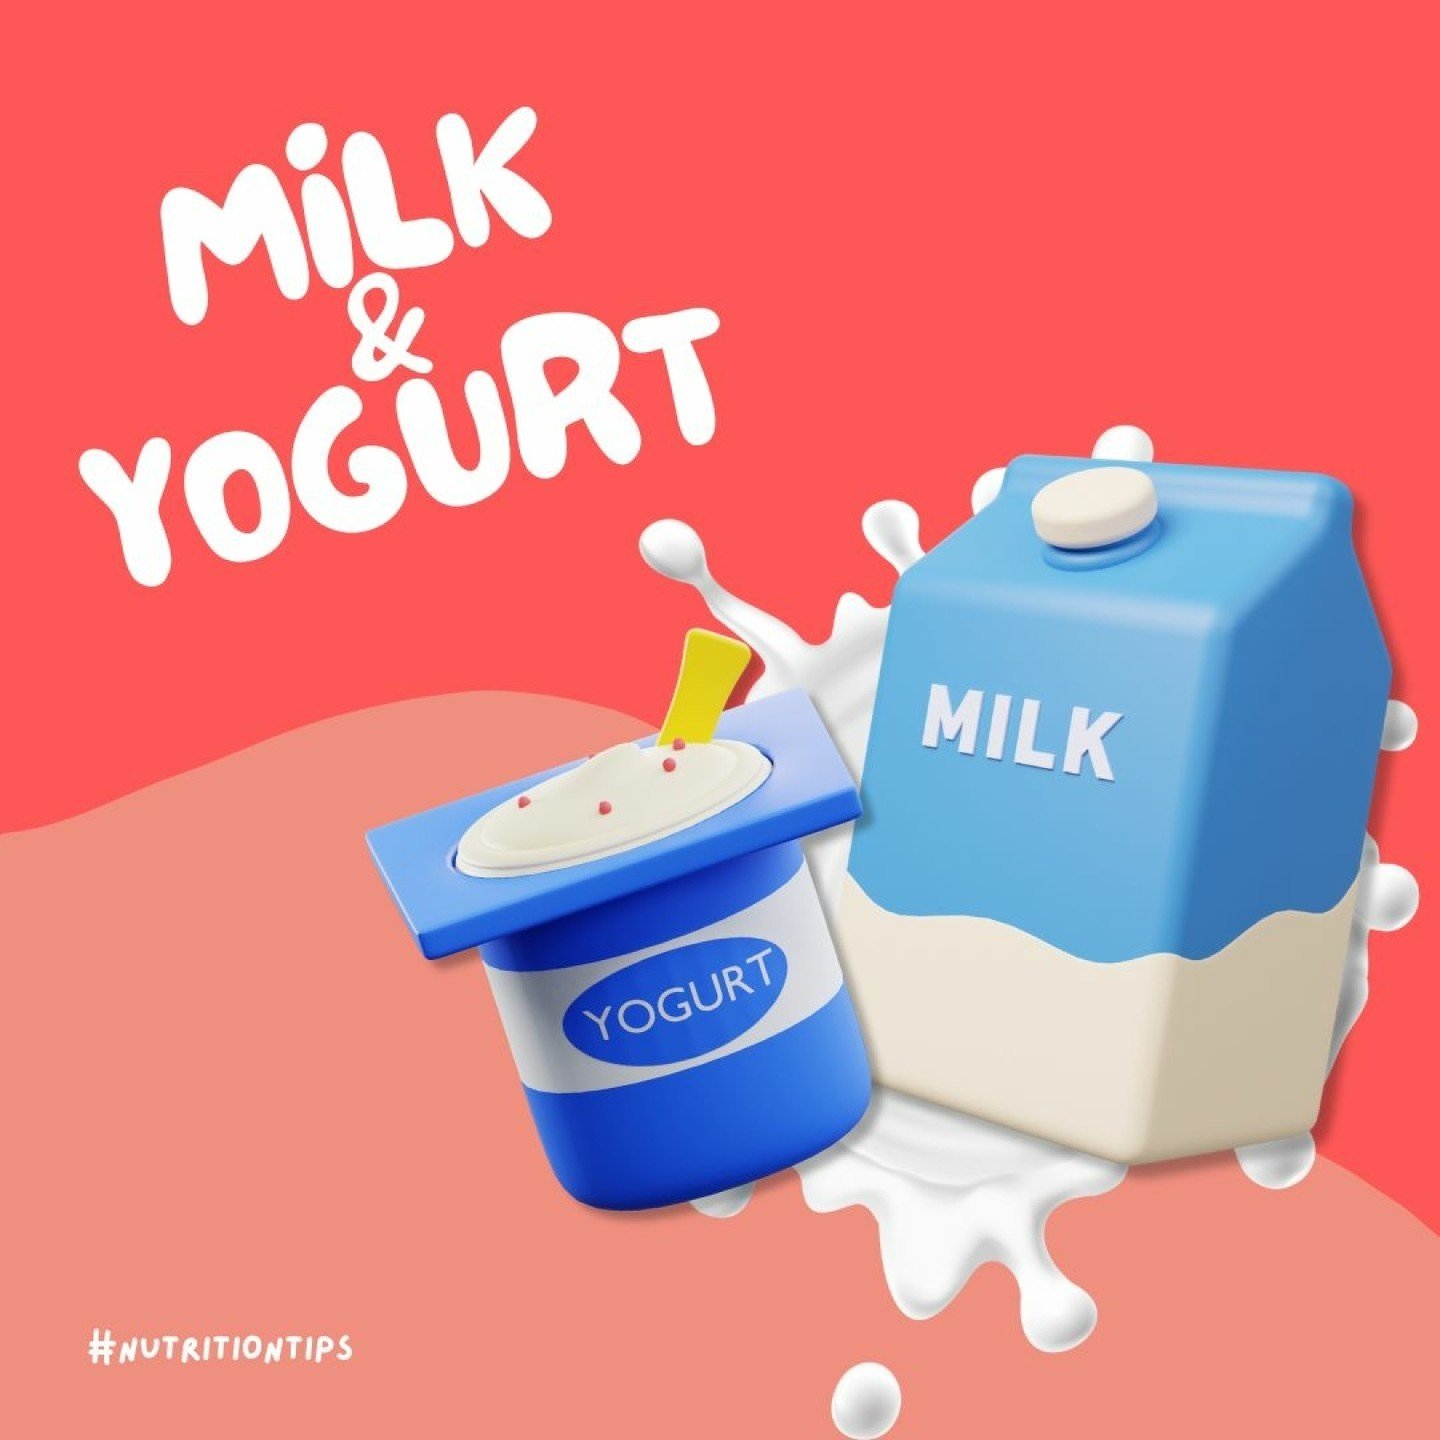 🥛Milk and yogurt are nutritional powerhouses that offer numerous health benefits. 

🥛Both are excellent sources of calcium, which is crucial for maintaining strong bones and teeth. 

🥛Adequate calcium intake is essential throughout life, but it is